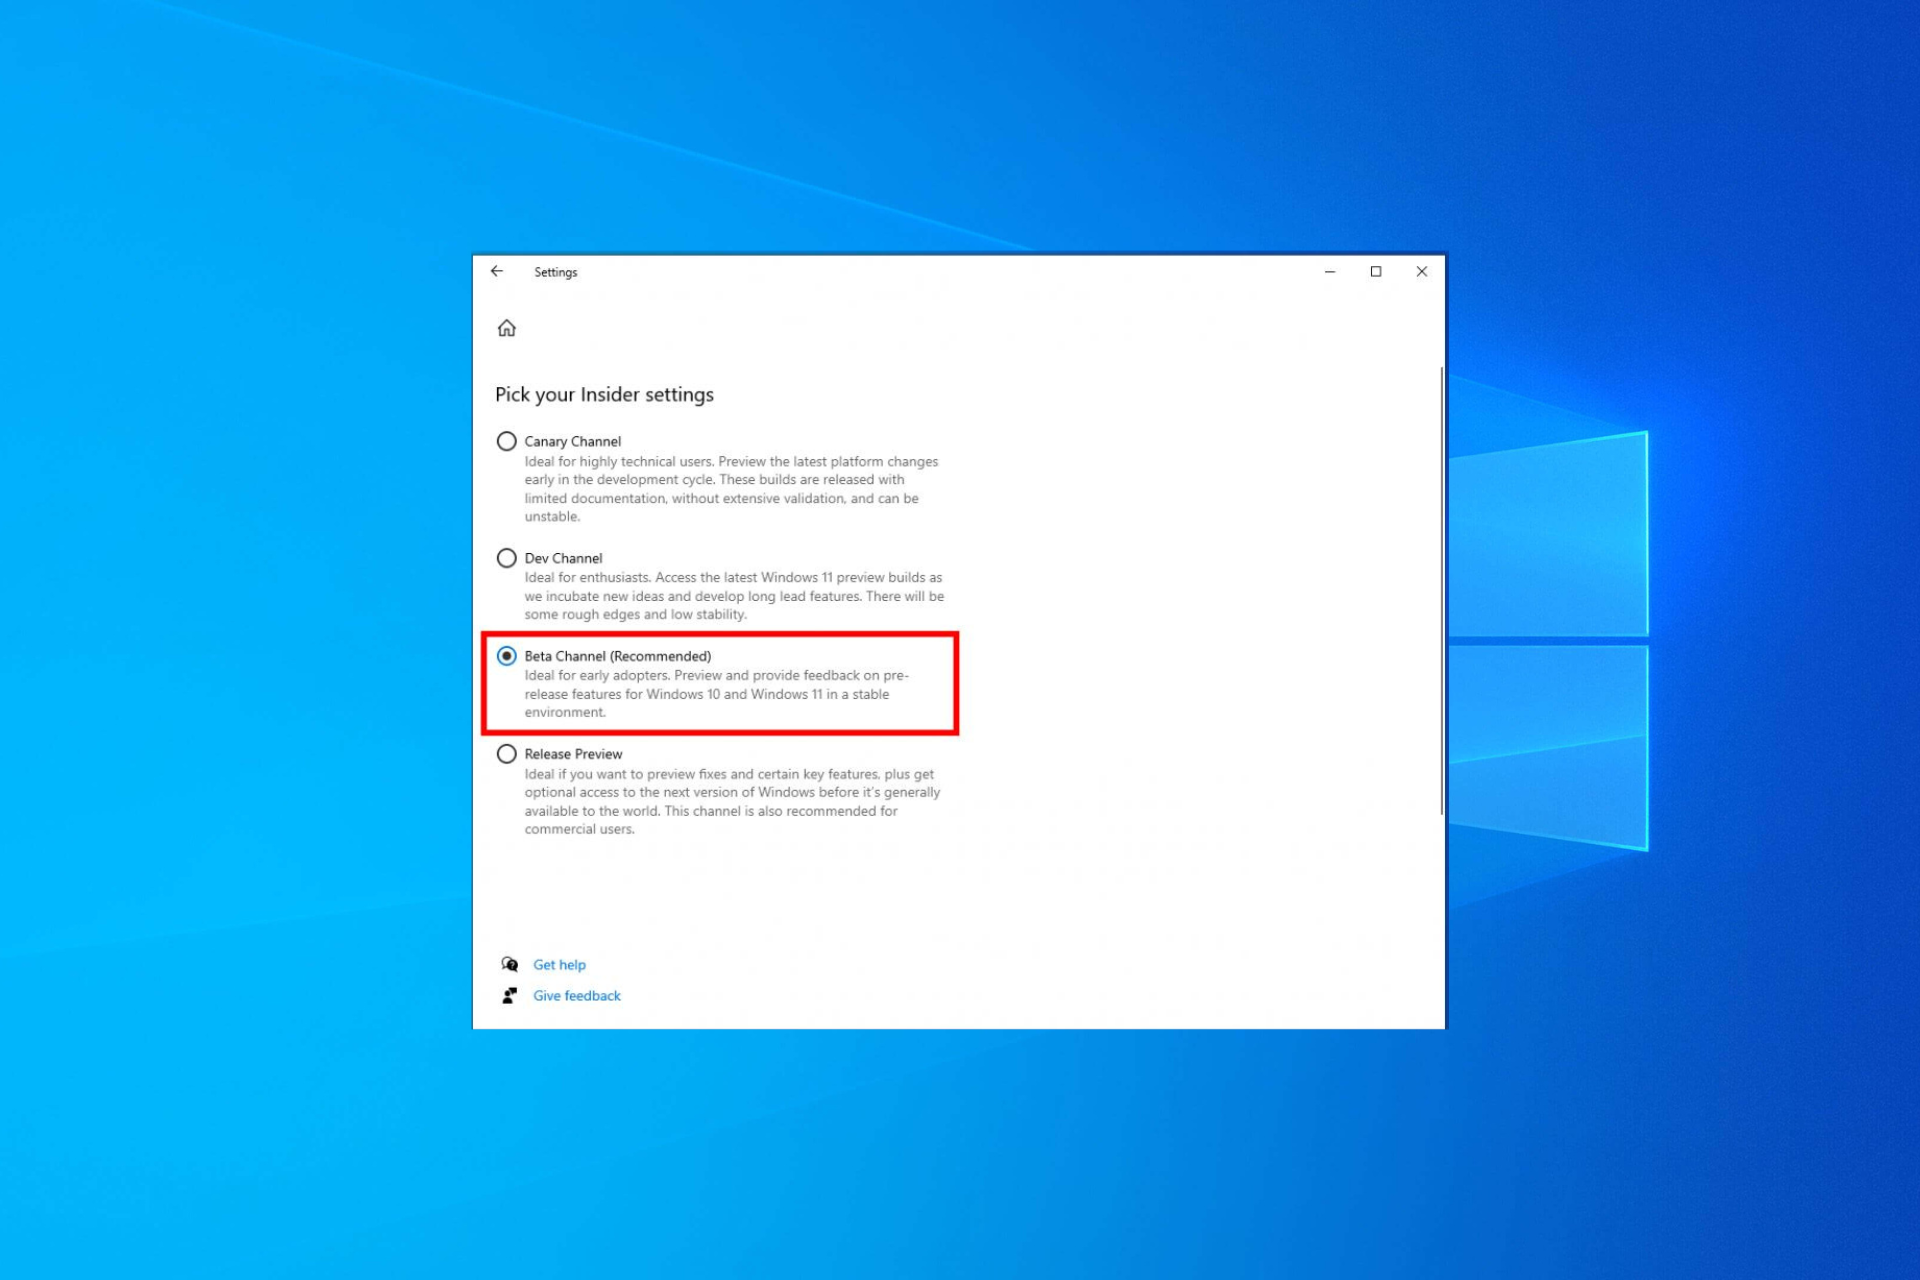 Windows 10 Beta Channel now available for Insiders; here's what you need to know